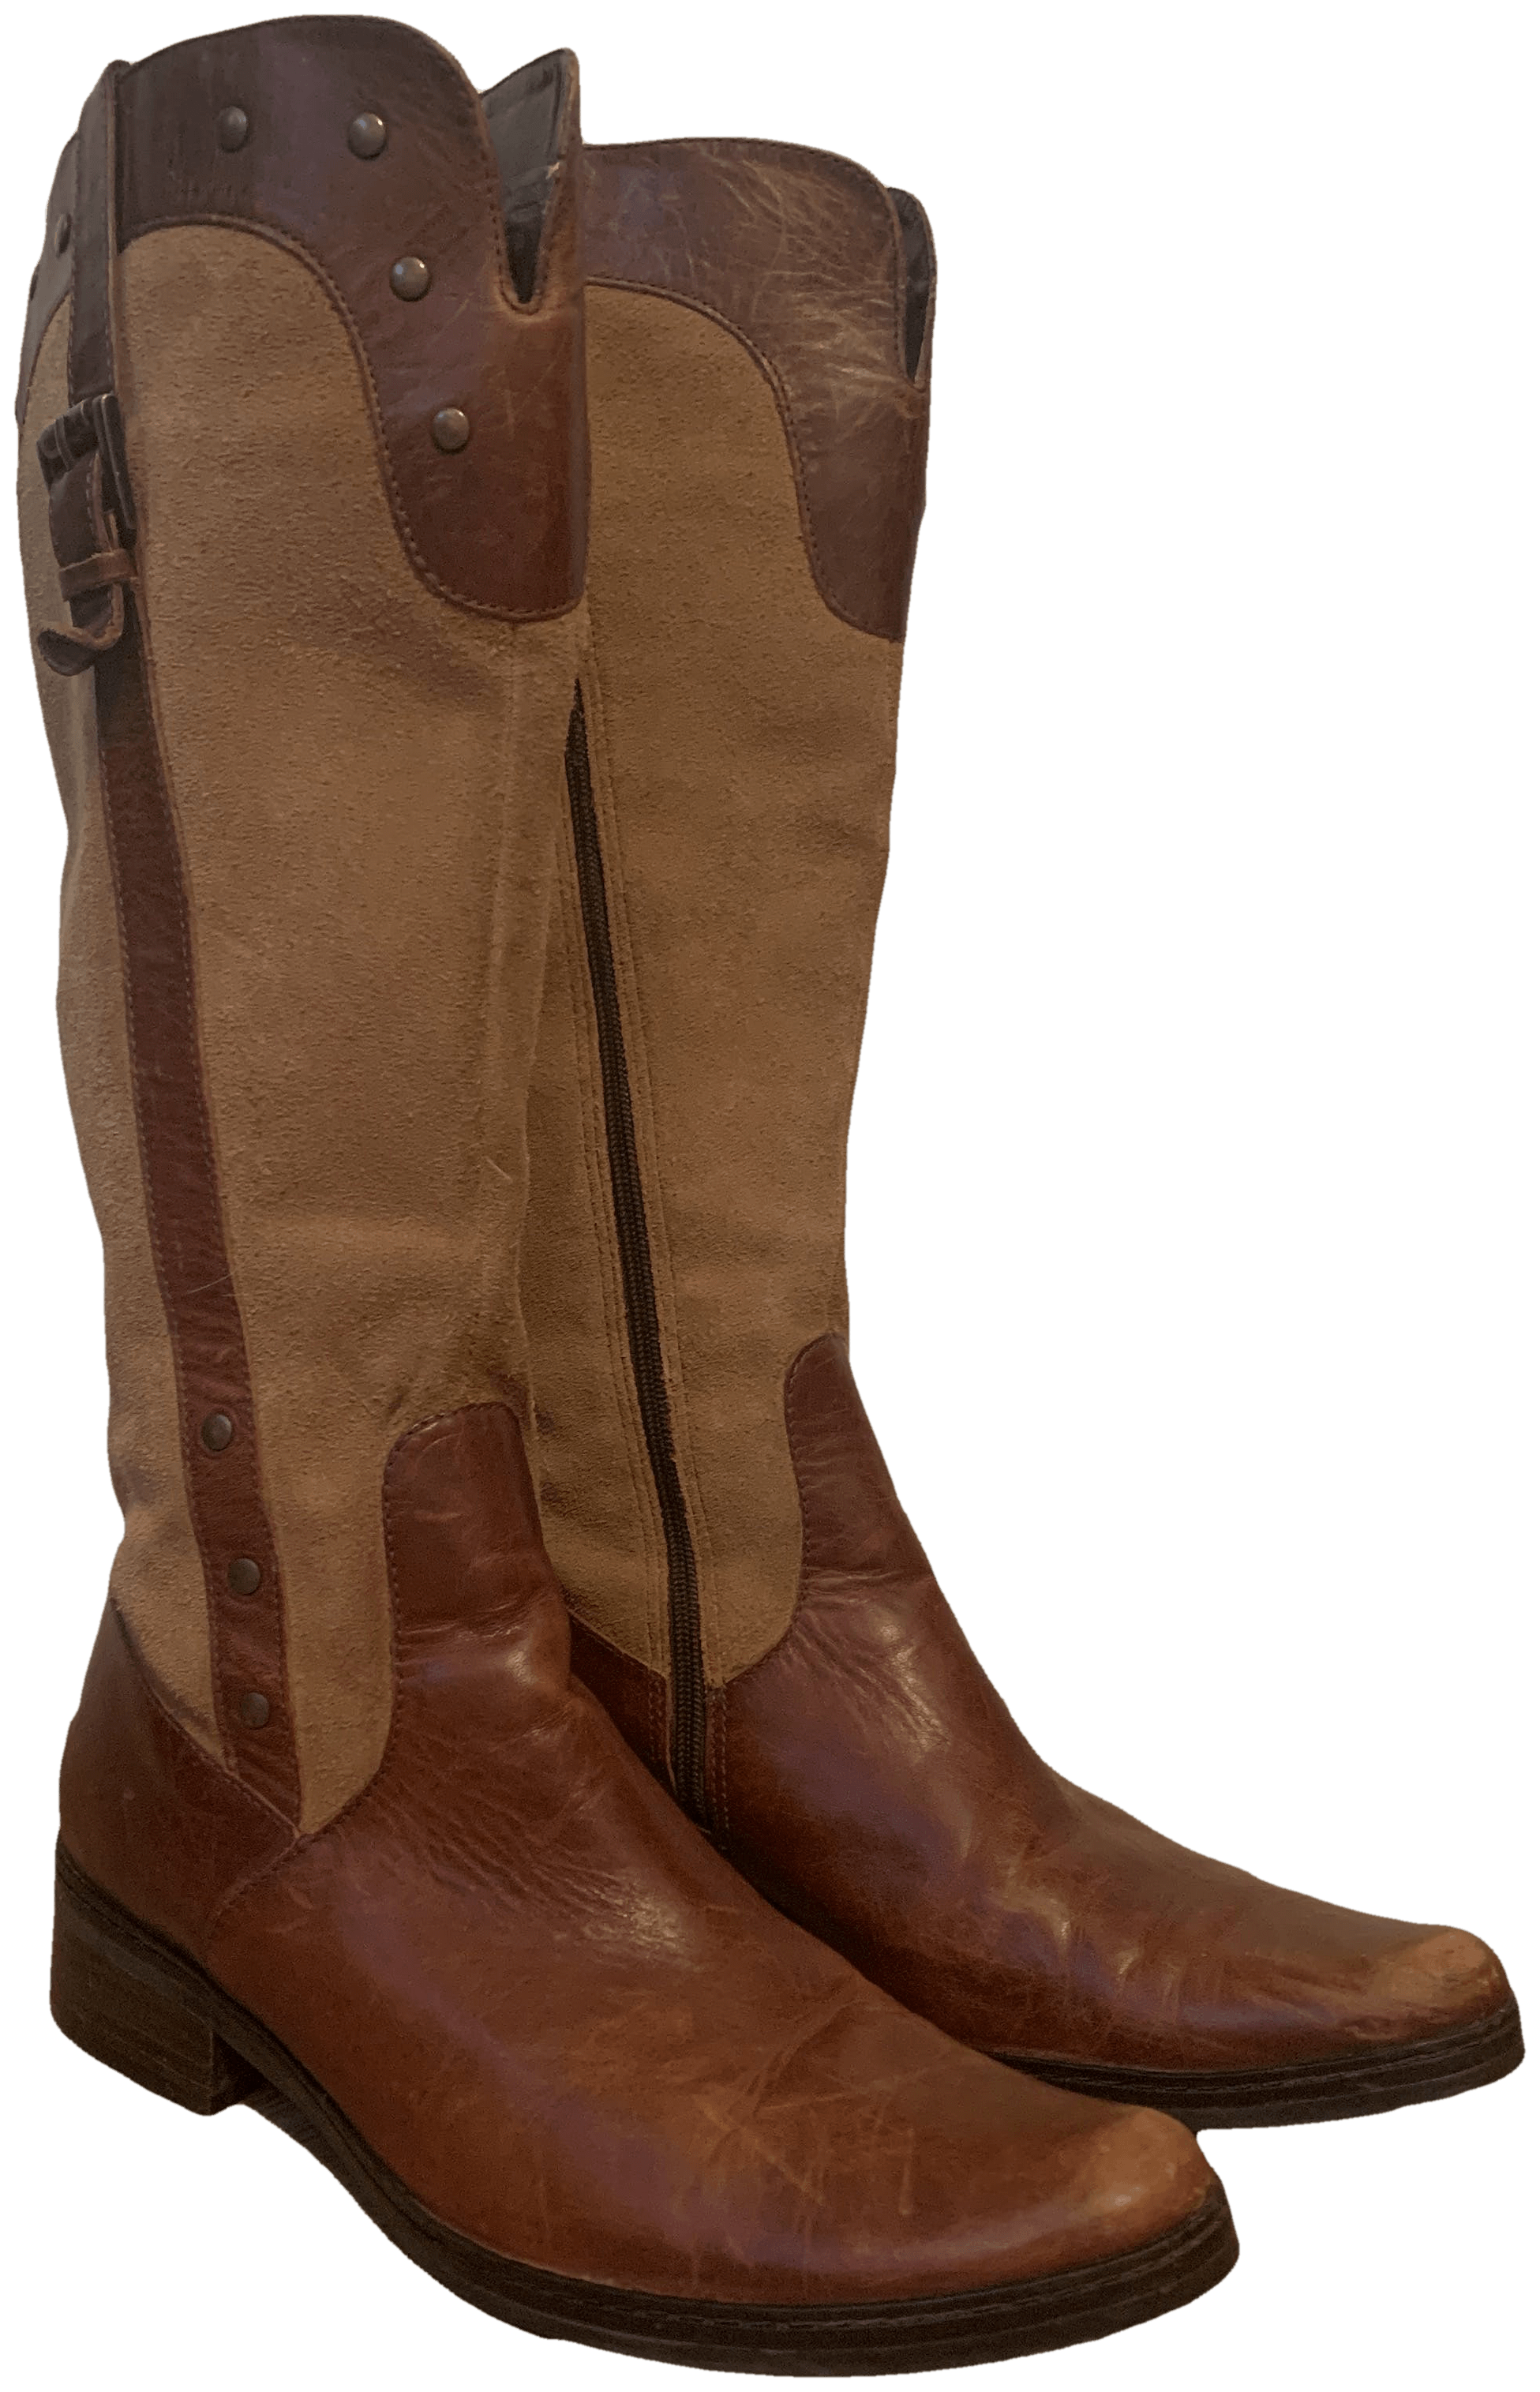 Brown Knee High Boots by Matisse 